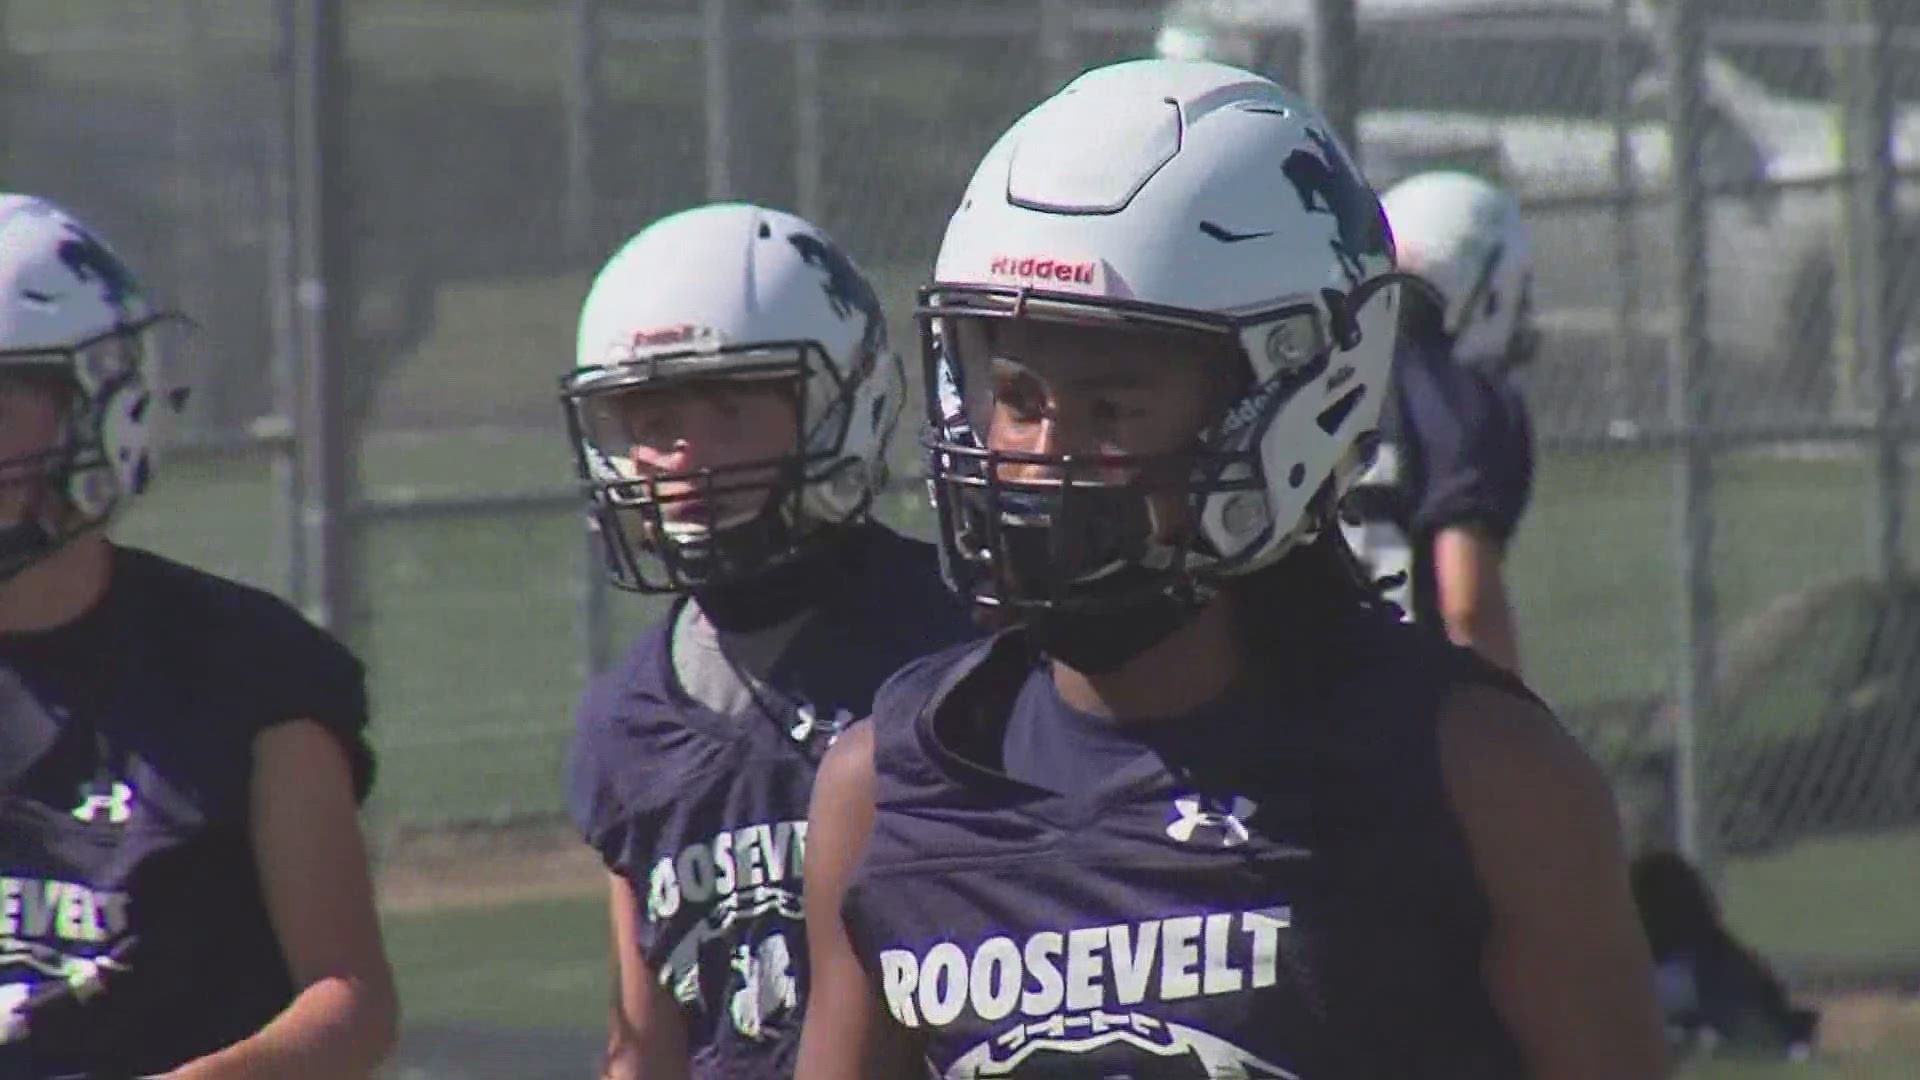 The Roosevelt Roughriders are hoping to build on their success in year two with Mitch Moore as head coach.